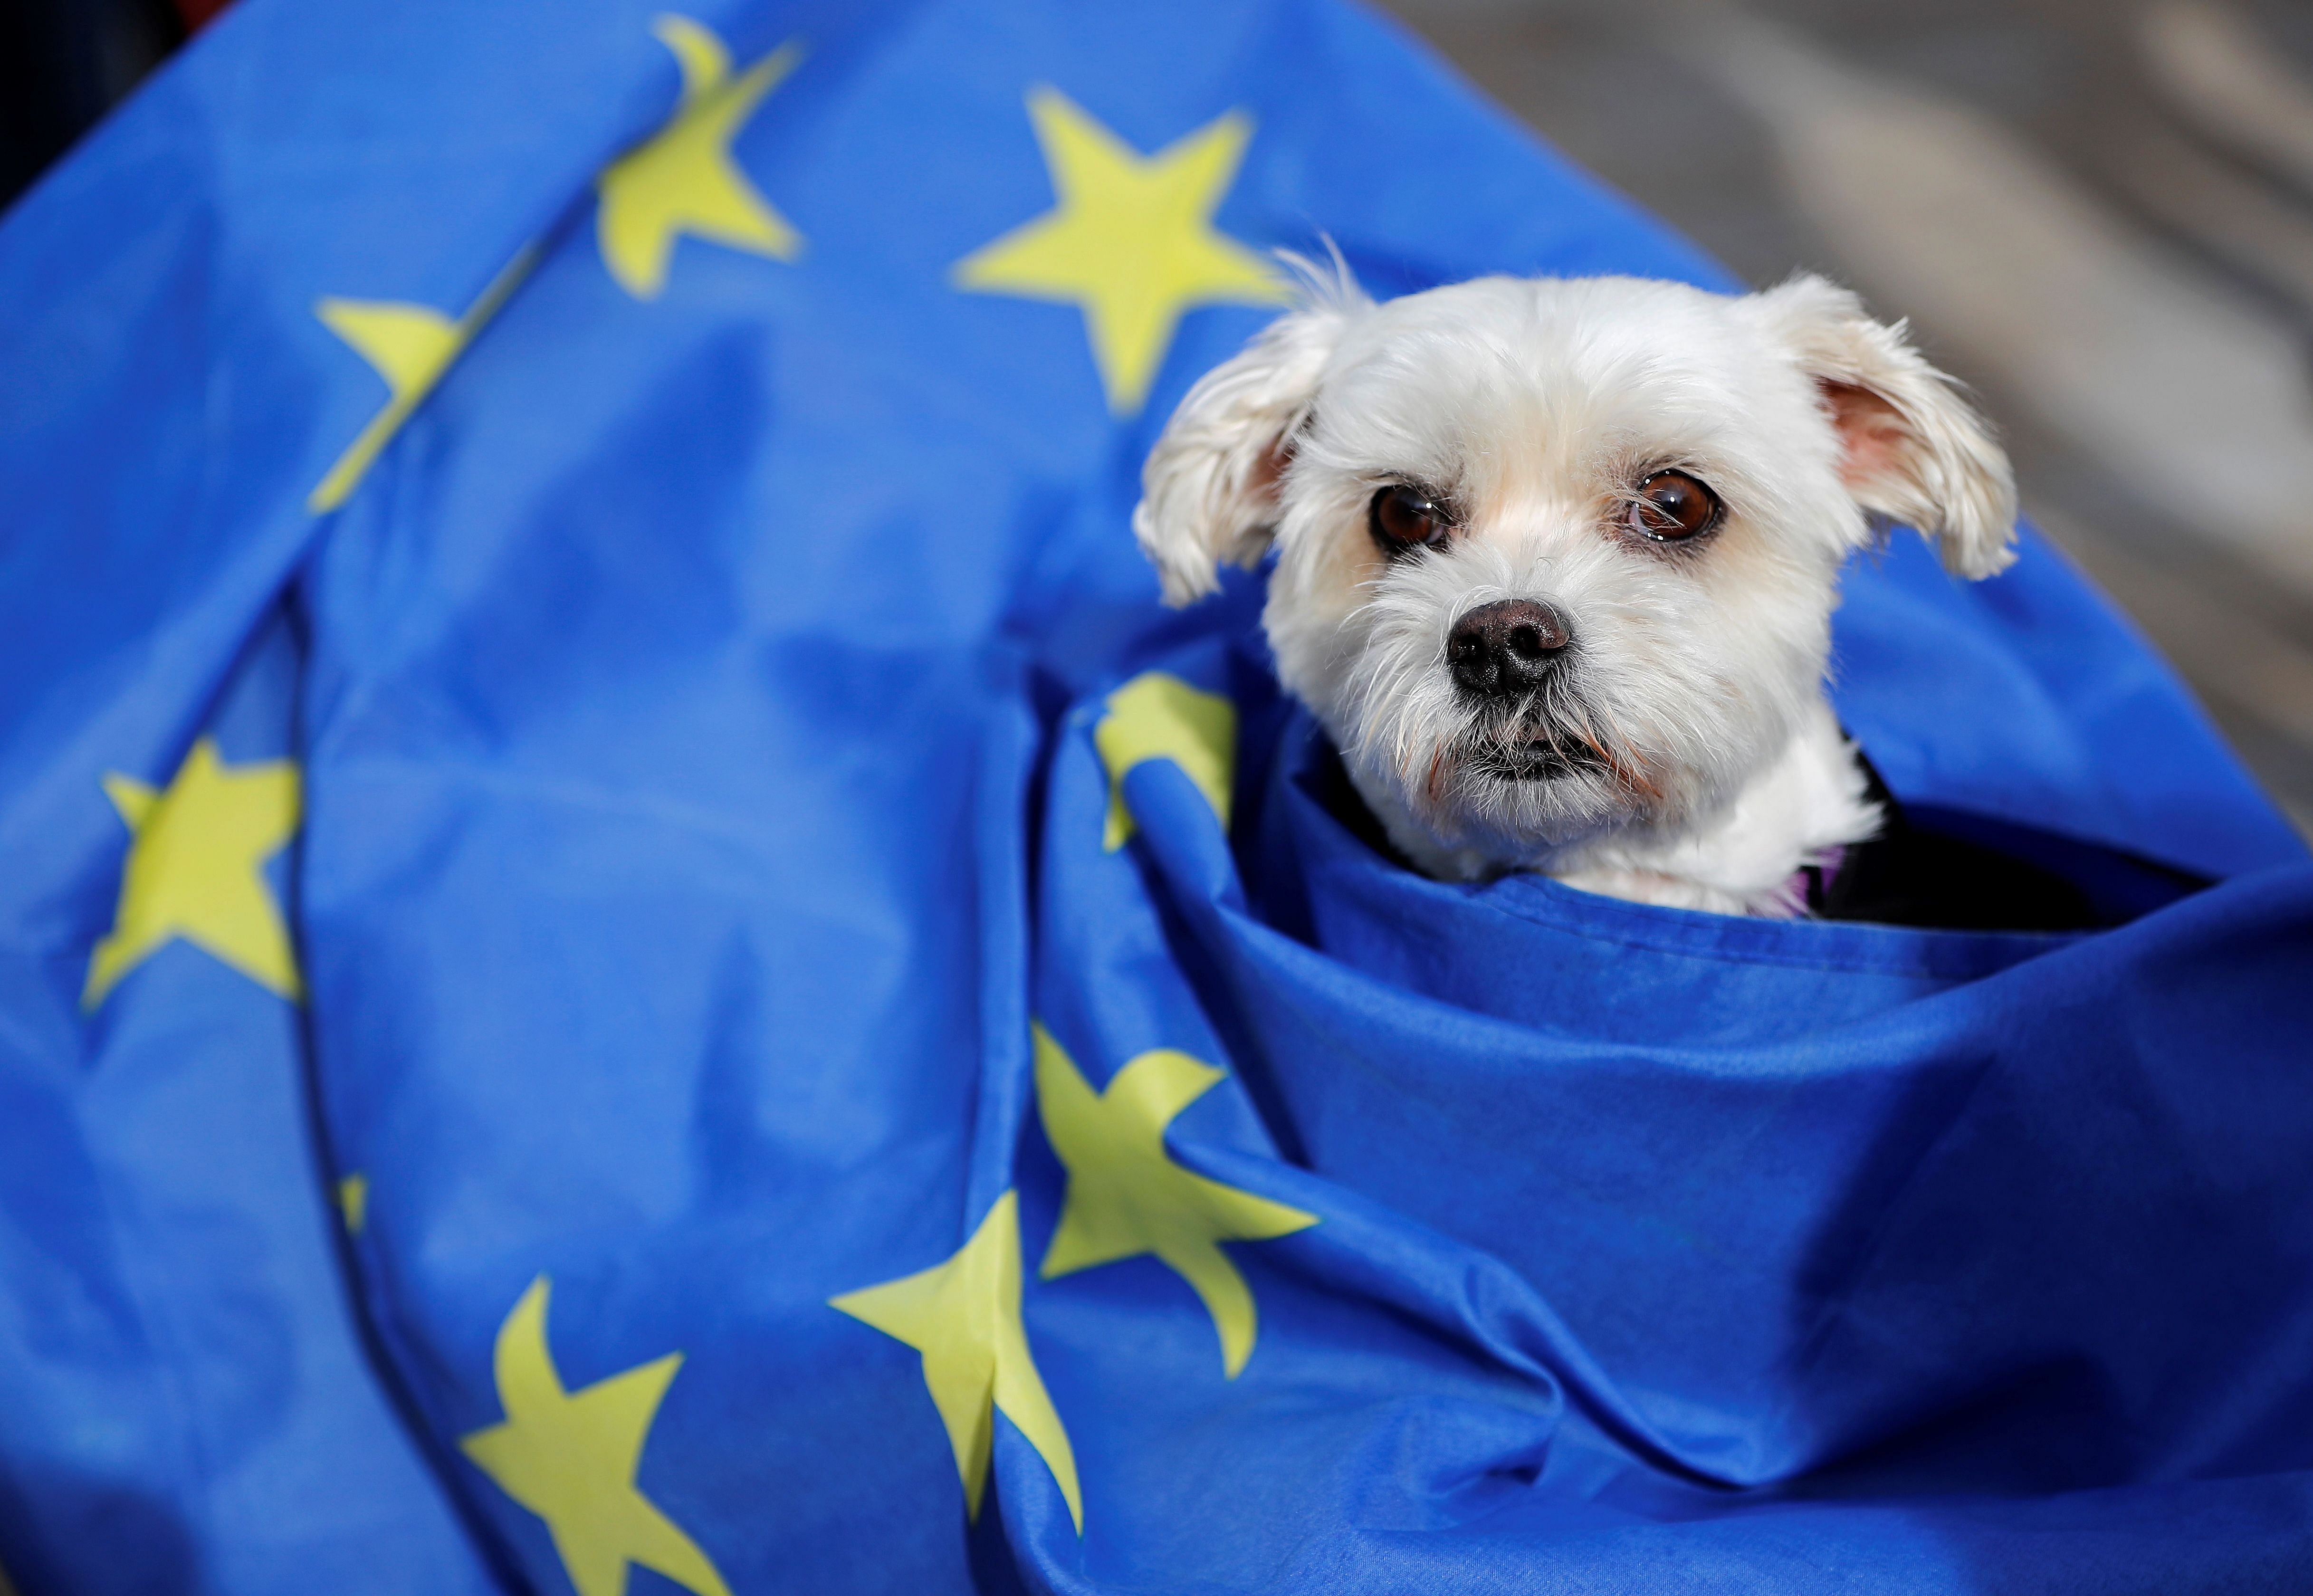 In this file photo taken on October 07, 2018 Dog owners and their pets gather before participating in a pro-EU, anti-Brexit march, calling for a "People's Vote on Brexit", in central London on October 7, 2018. - British pet owners will need a new document to enter the European Union with their animals after the Brexit transition period ends on 1 January next year, the government said on December 16, 2020. Owners will have to get an animal health certificate from a vet no earlier than 10 days before travel, the government said on its Brexit guidance page. Credit: AFP Photo